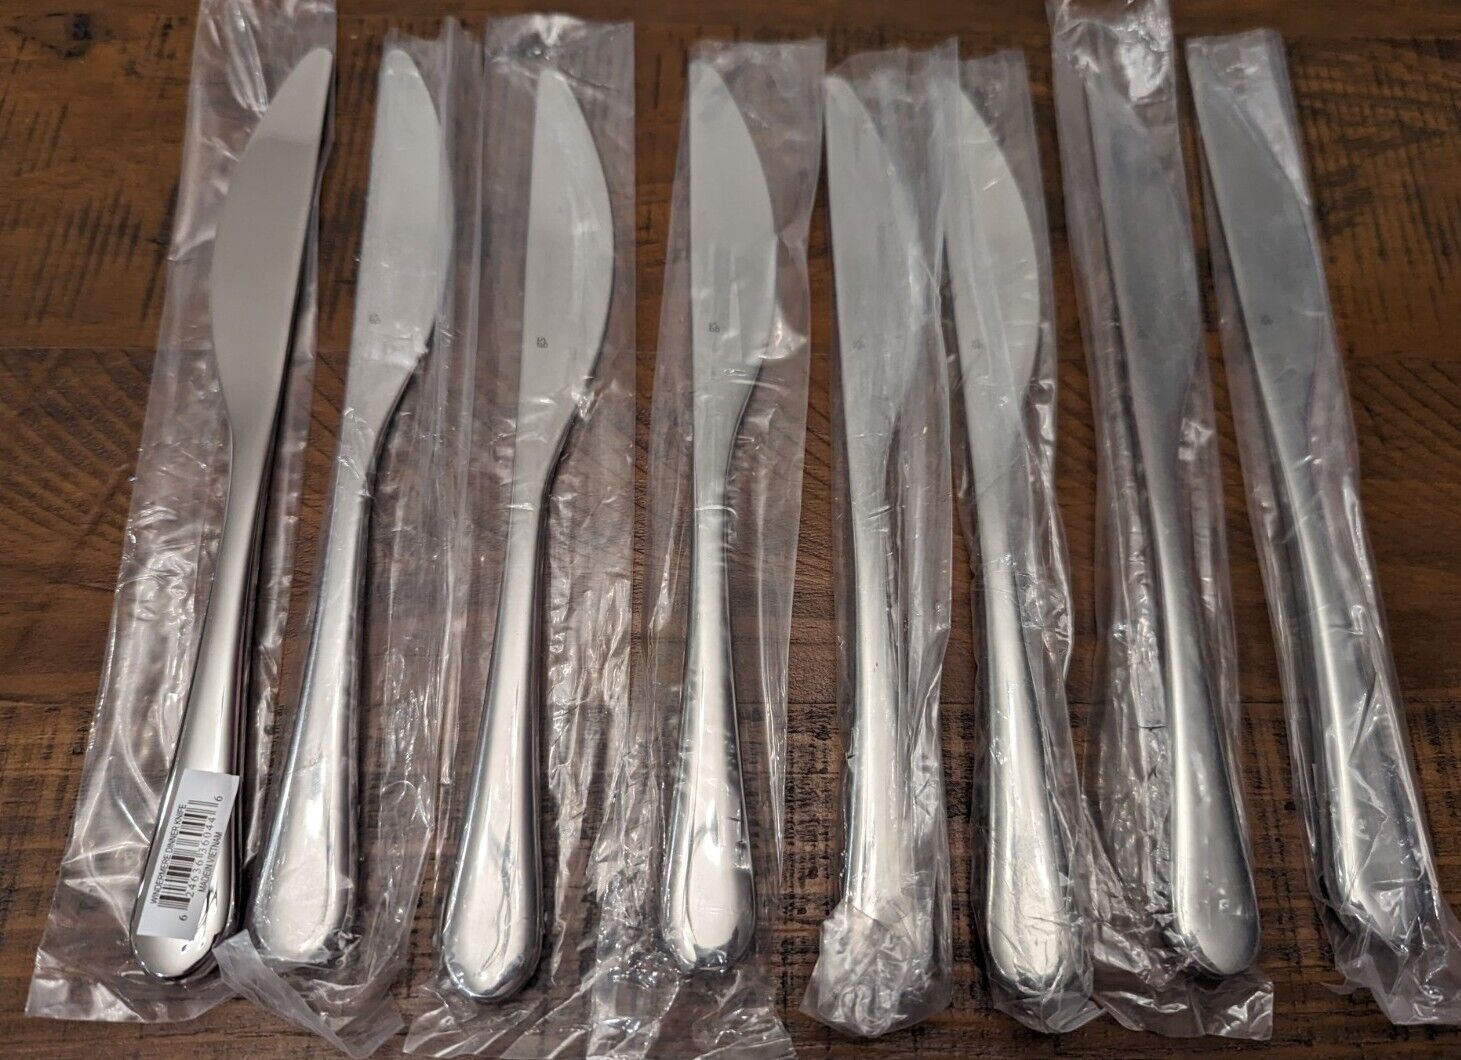 8 x Gourmet Settings GS 18/10 Stainless WINDMERE Knives NEW